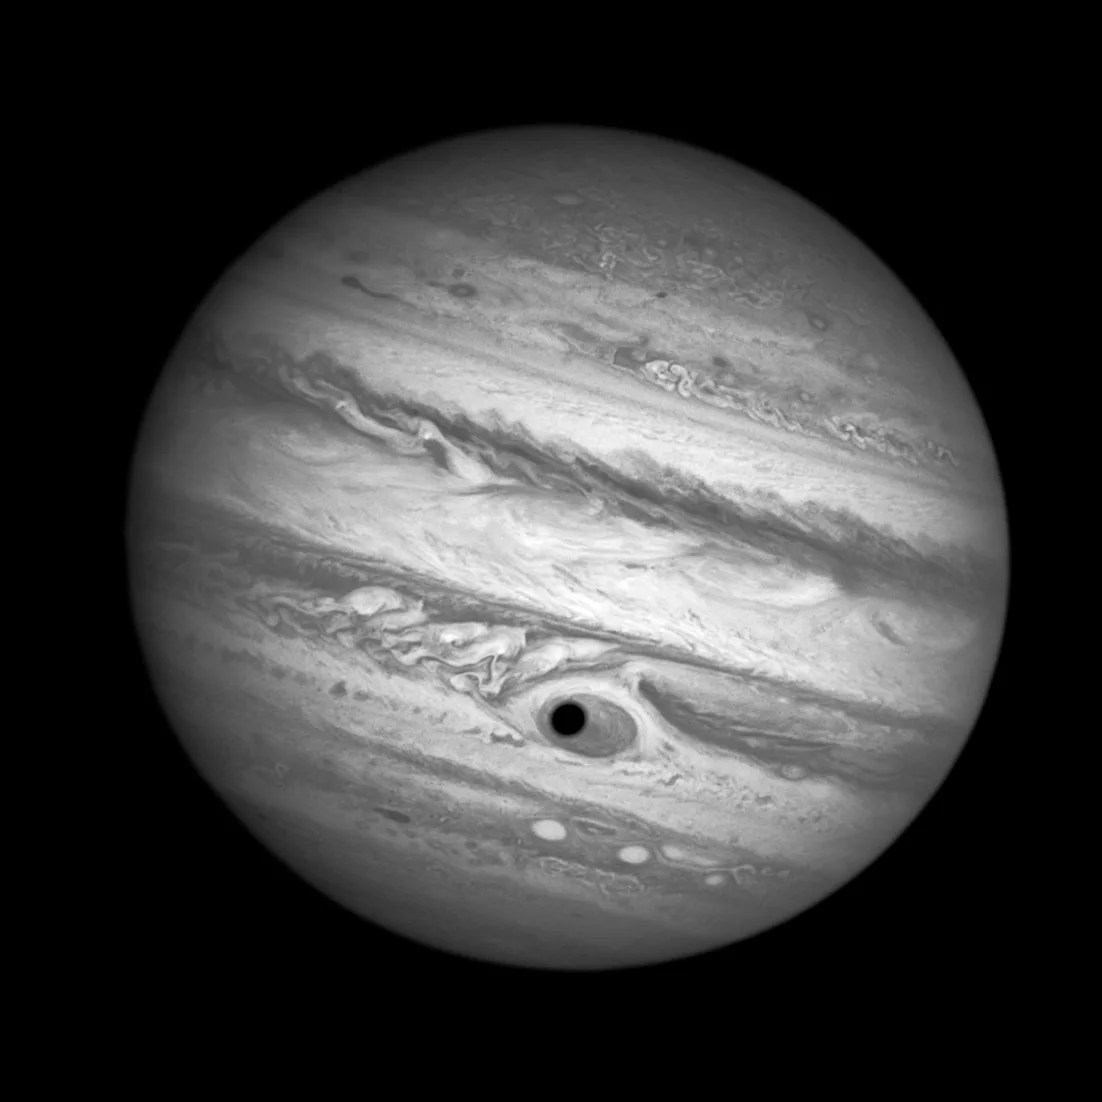 Jupiter with its moon Ganymede's shadow forming the dark pupil of an eye with the great red spot as the iris.